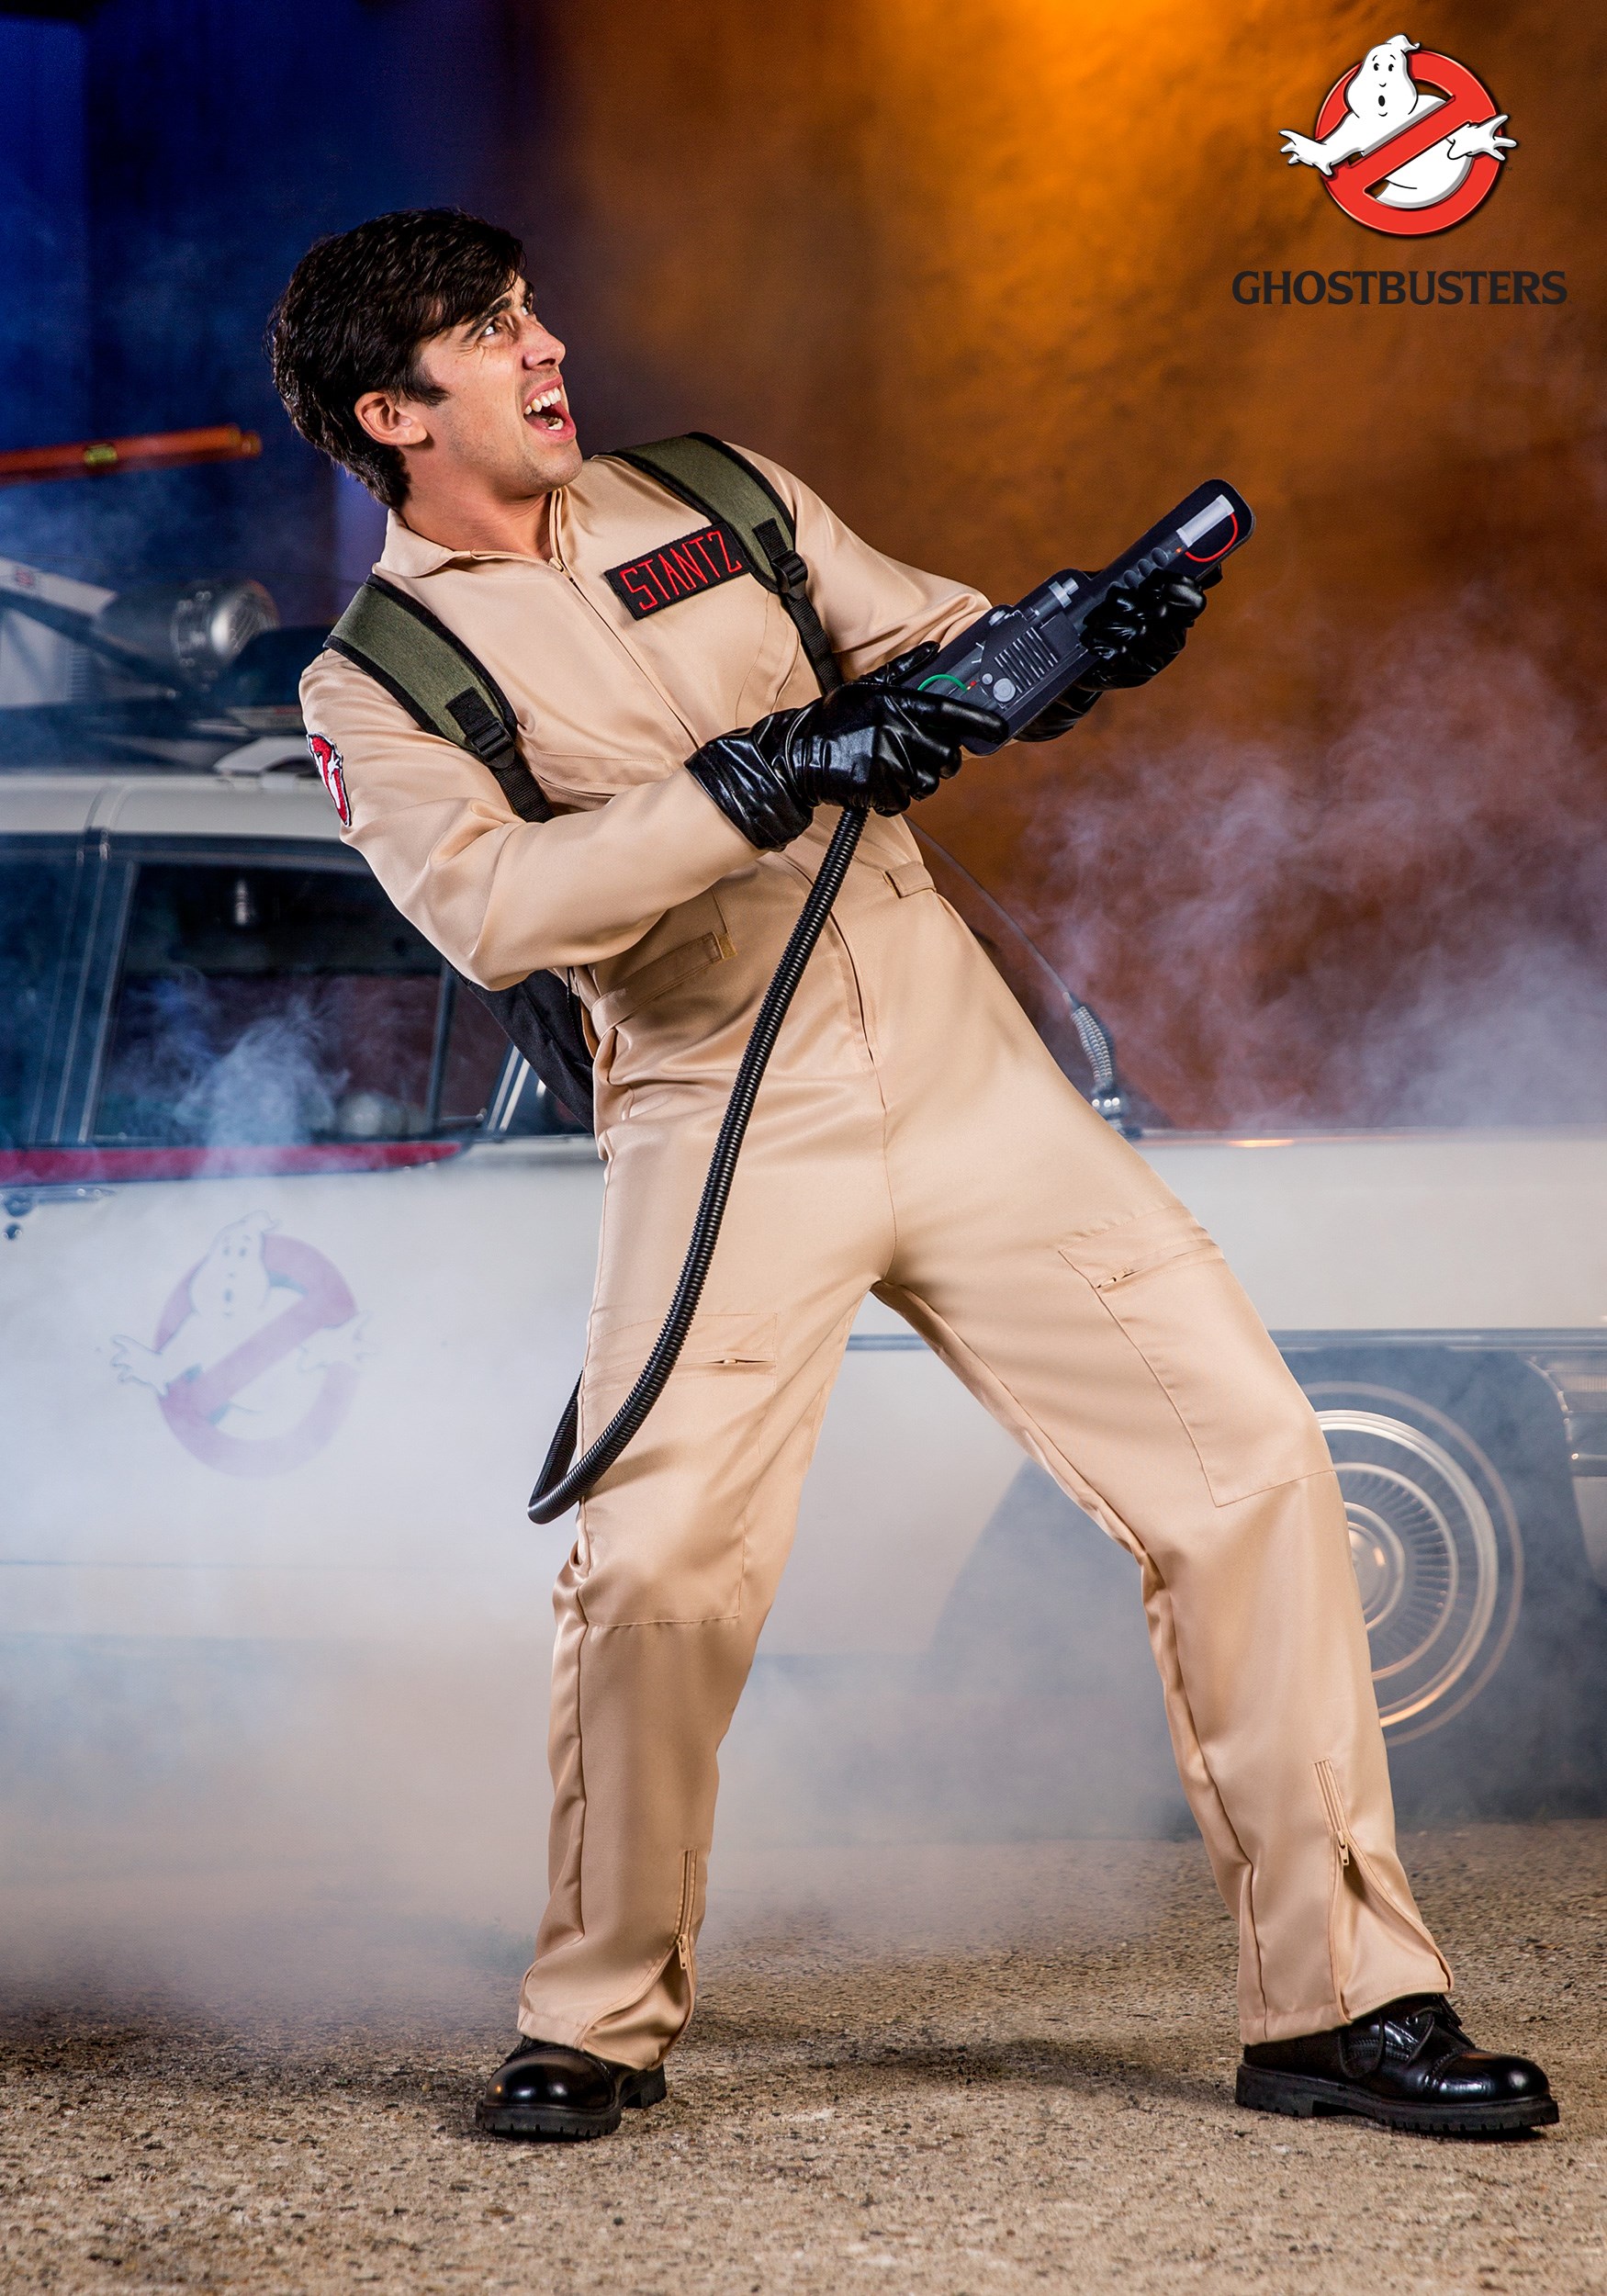 Ghostbusters Deluxe Costume for Men